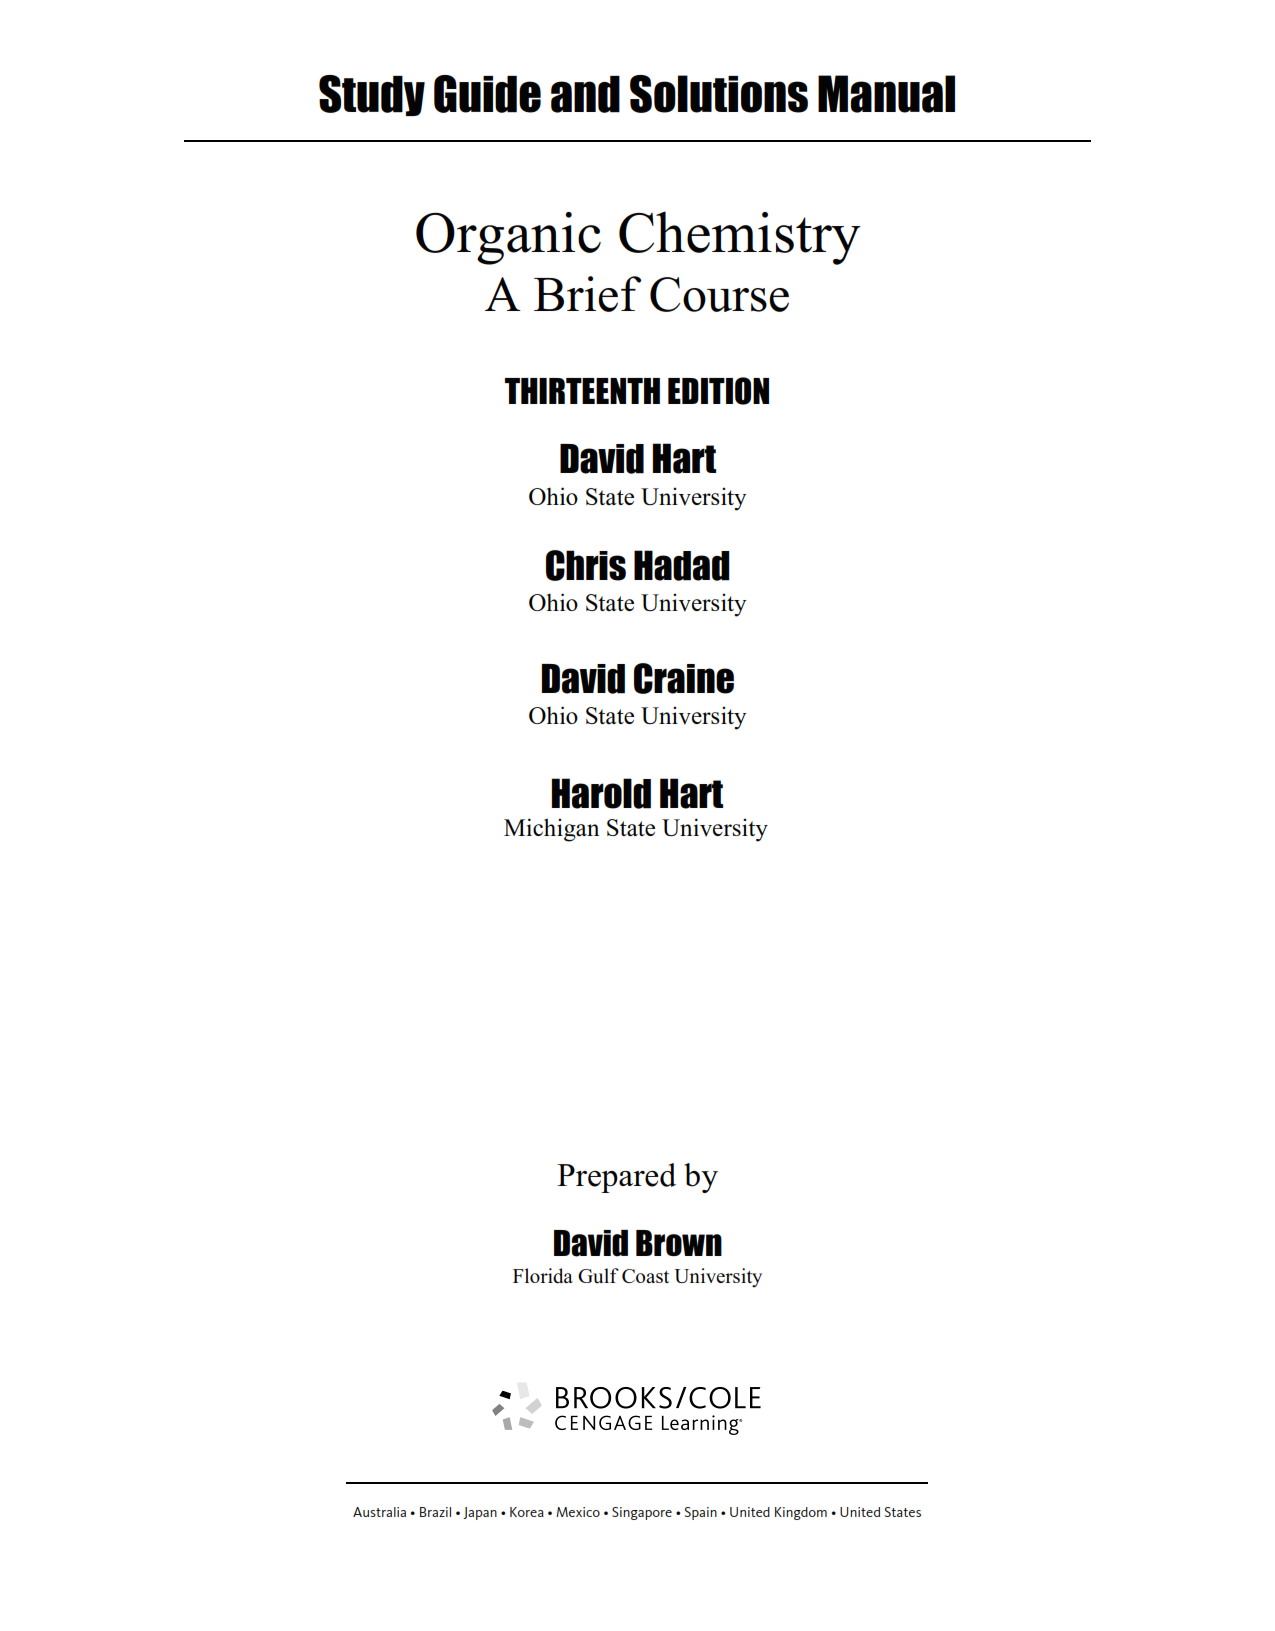 download free Study Guide and Solutions Manual Organic Chemistry A Brief Course International 13th edition by Hart , Hadad , Craine pdf